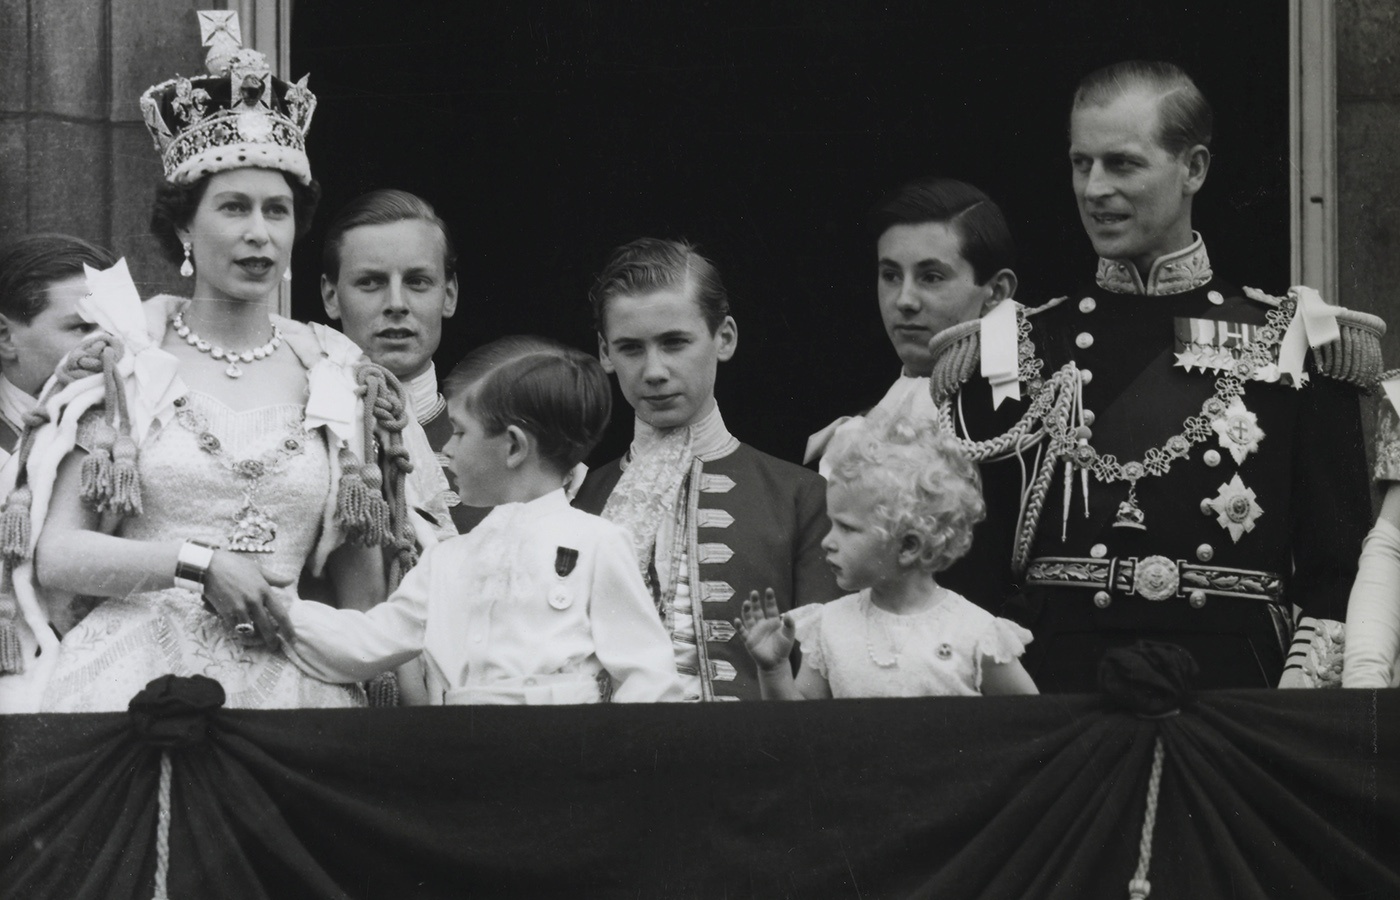 The Queen, Prince Philip, Prince Charles and Princess Anne on the balcony at Buckingham Palace after the coronation in 1953.